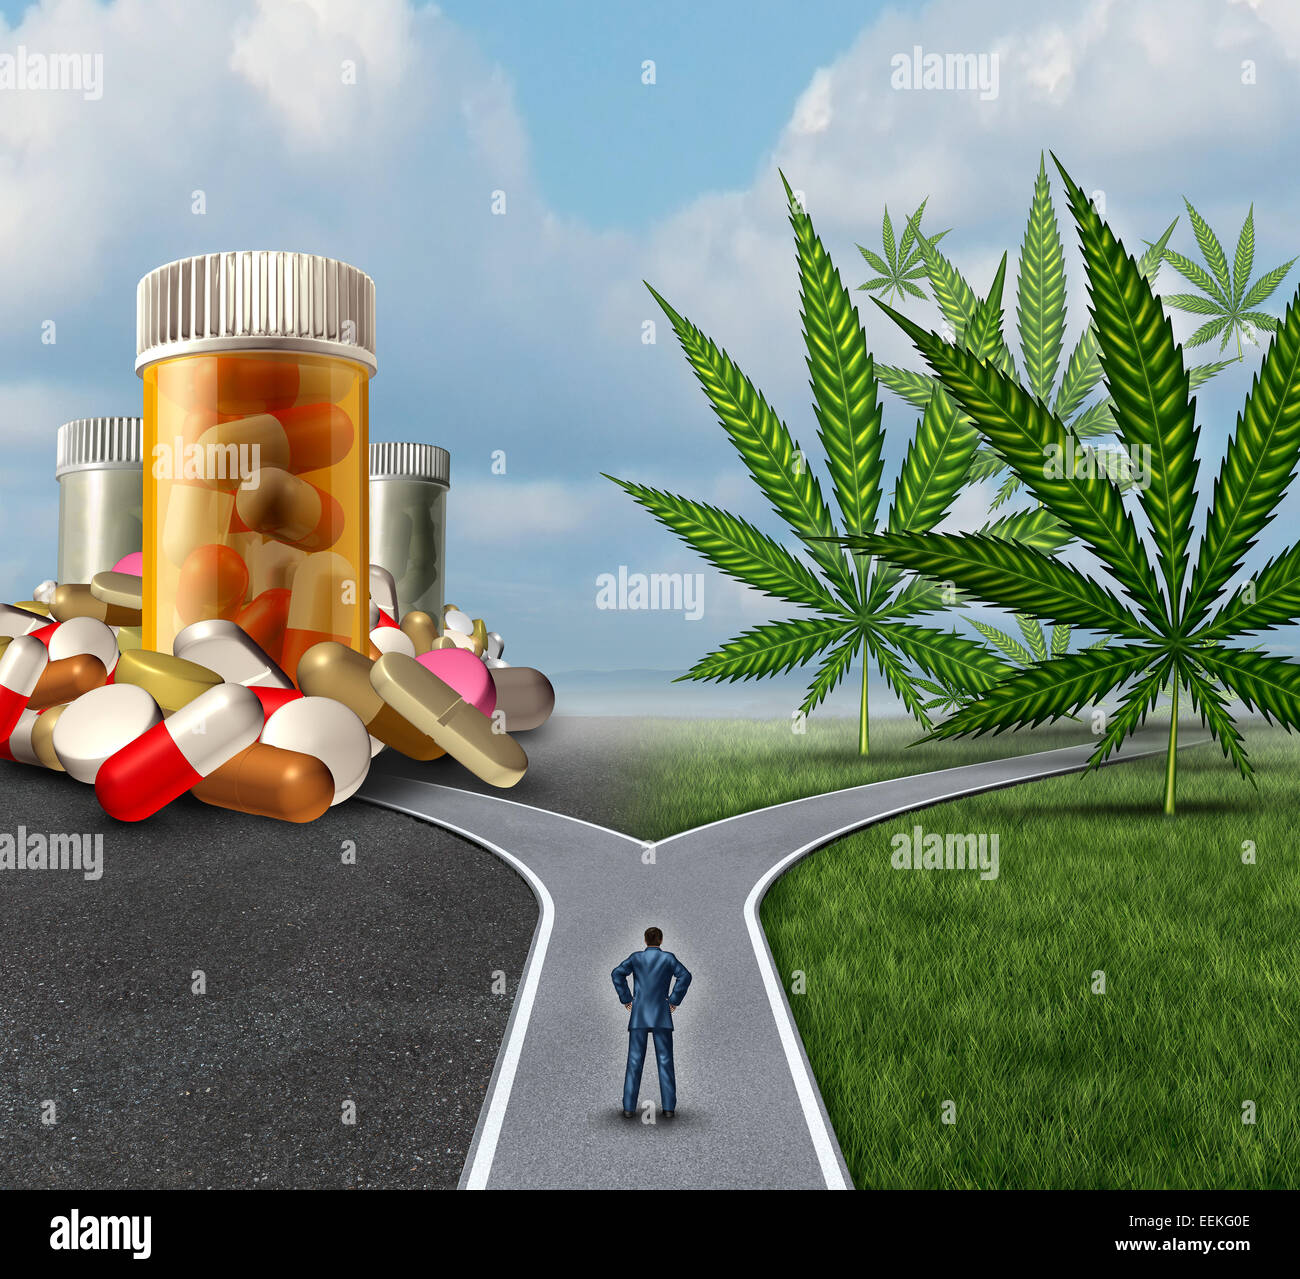 Marijuana medical choice dilemma health care concept as a person standing in front of two paths with one offering traditional medicine and the other option with cannabis. Stock Photo